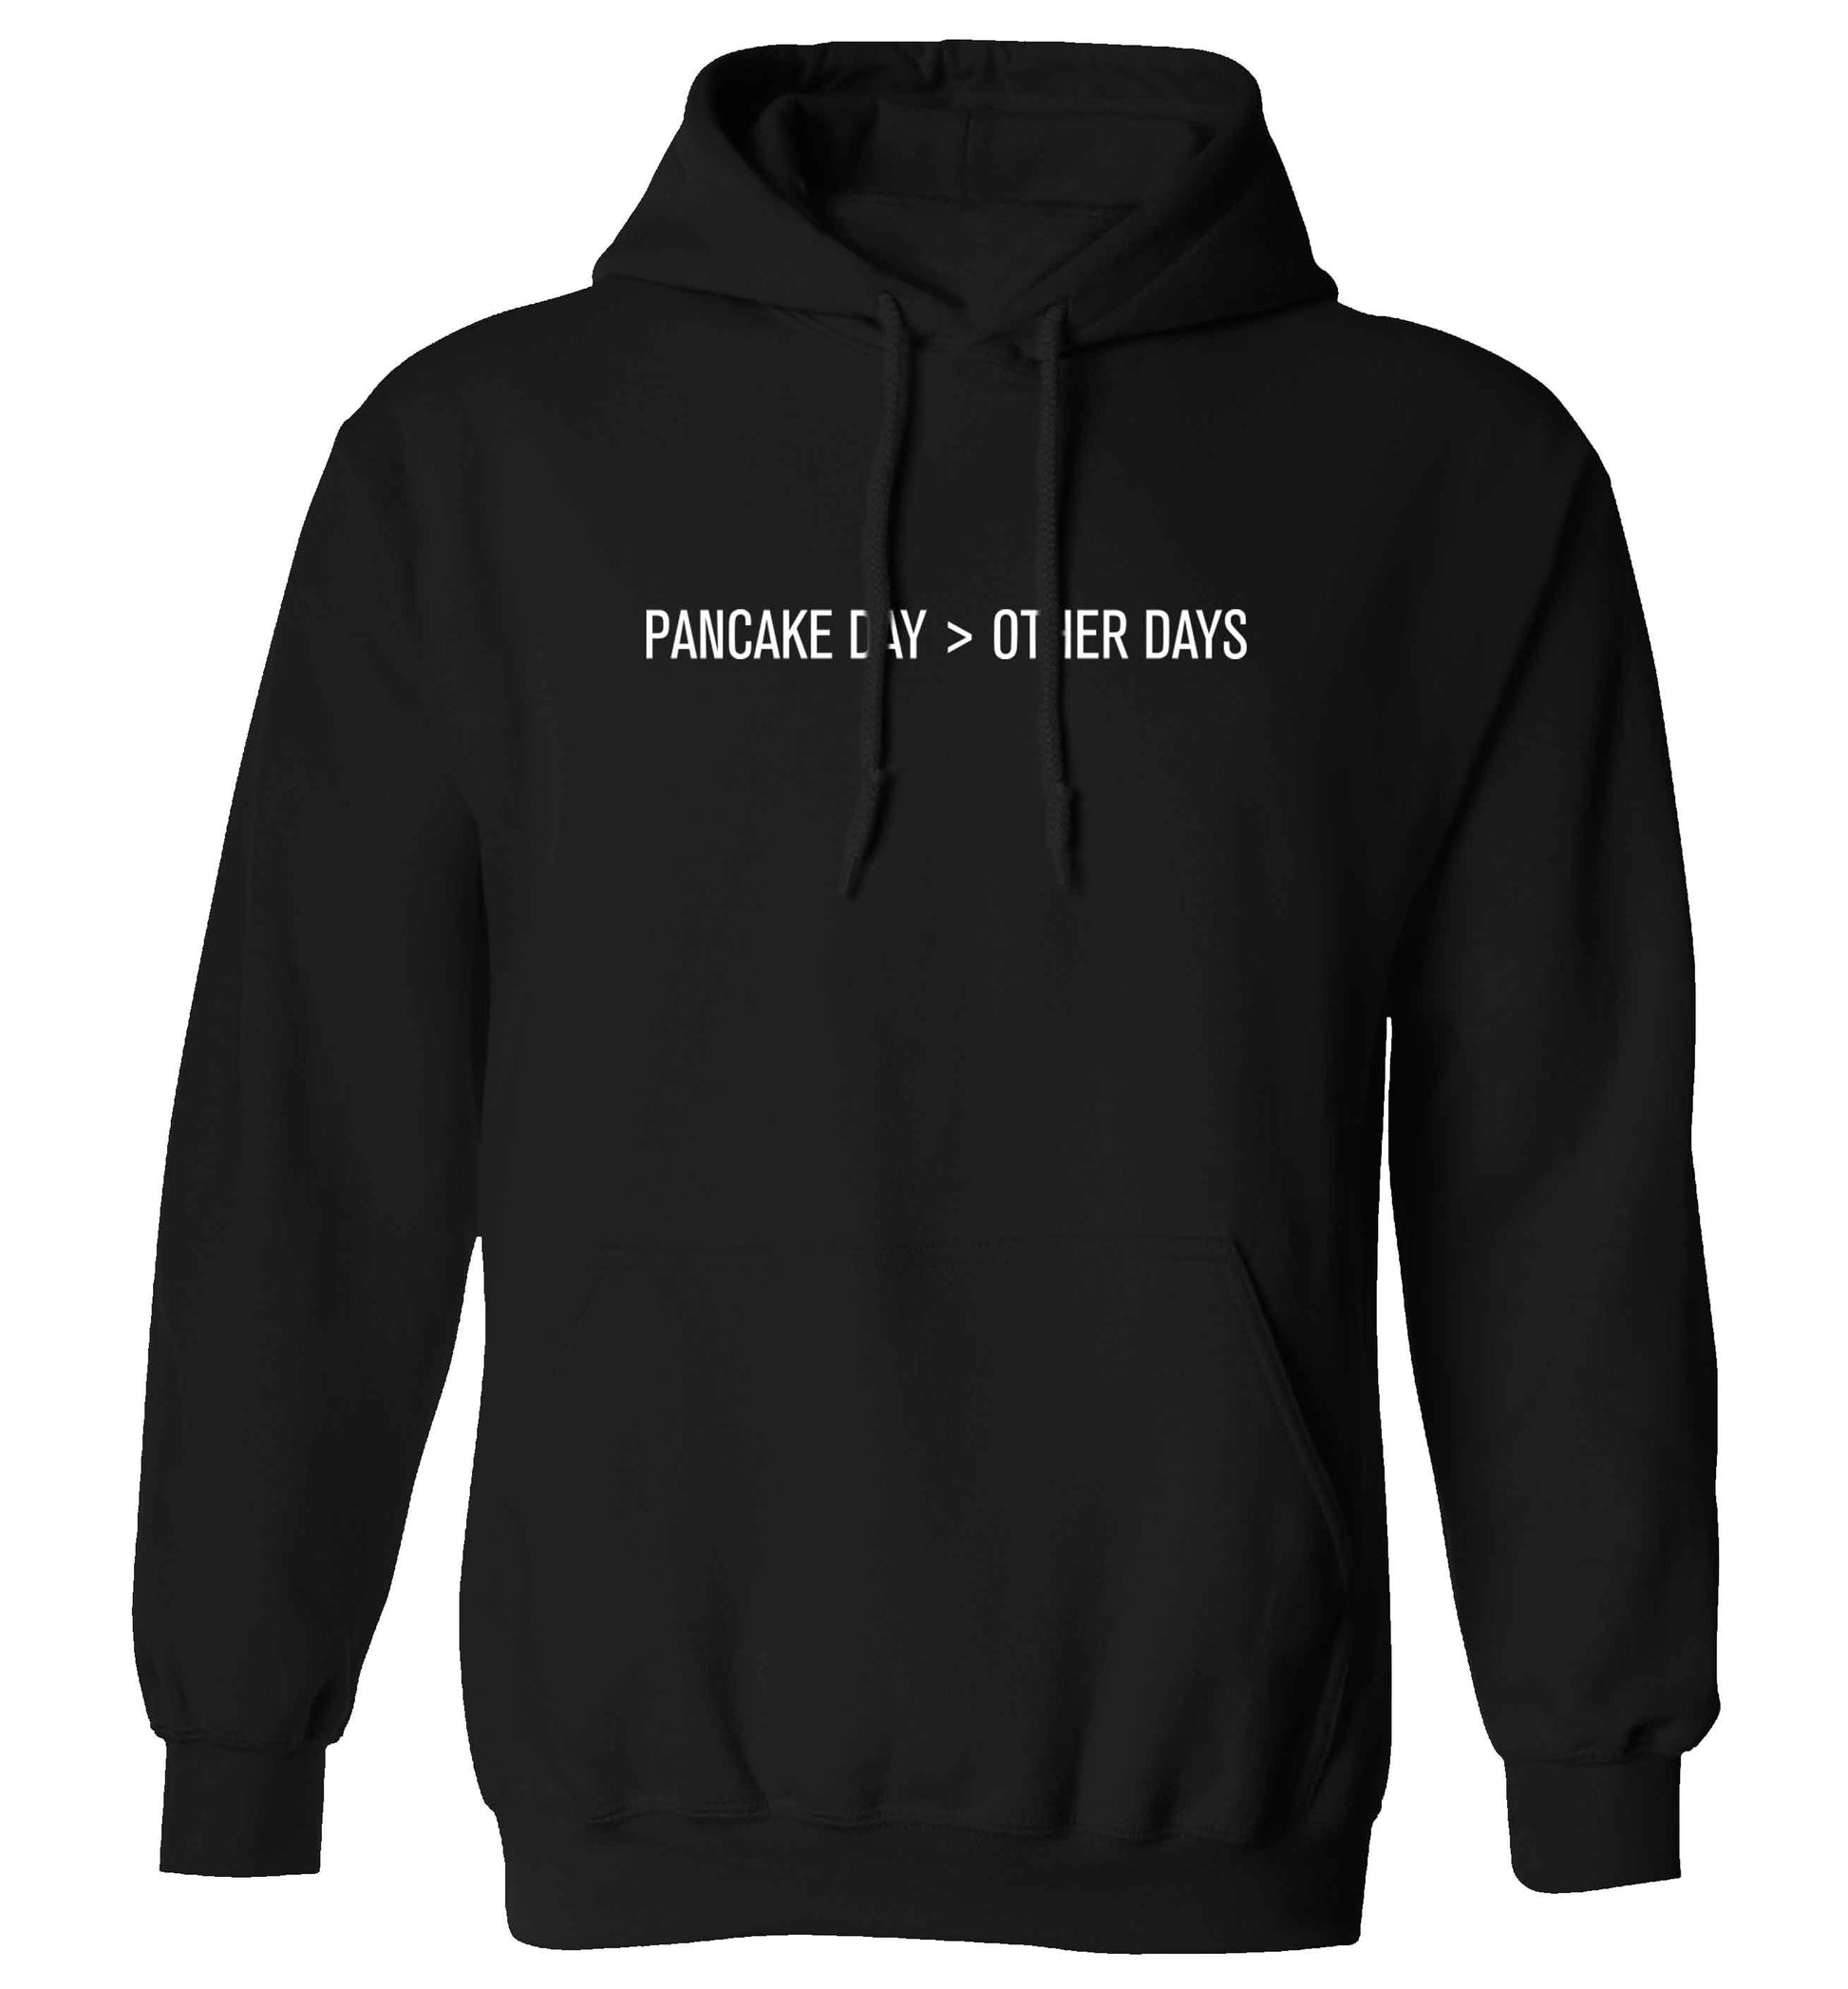 Pancake day > other days adults unisex black hoodie 2XL